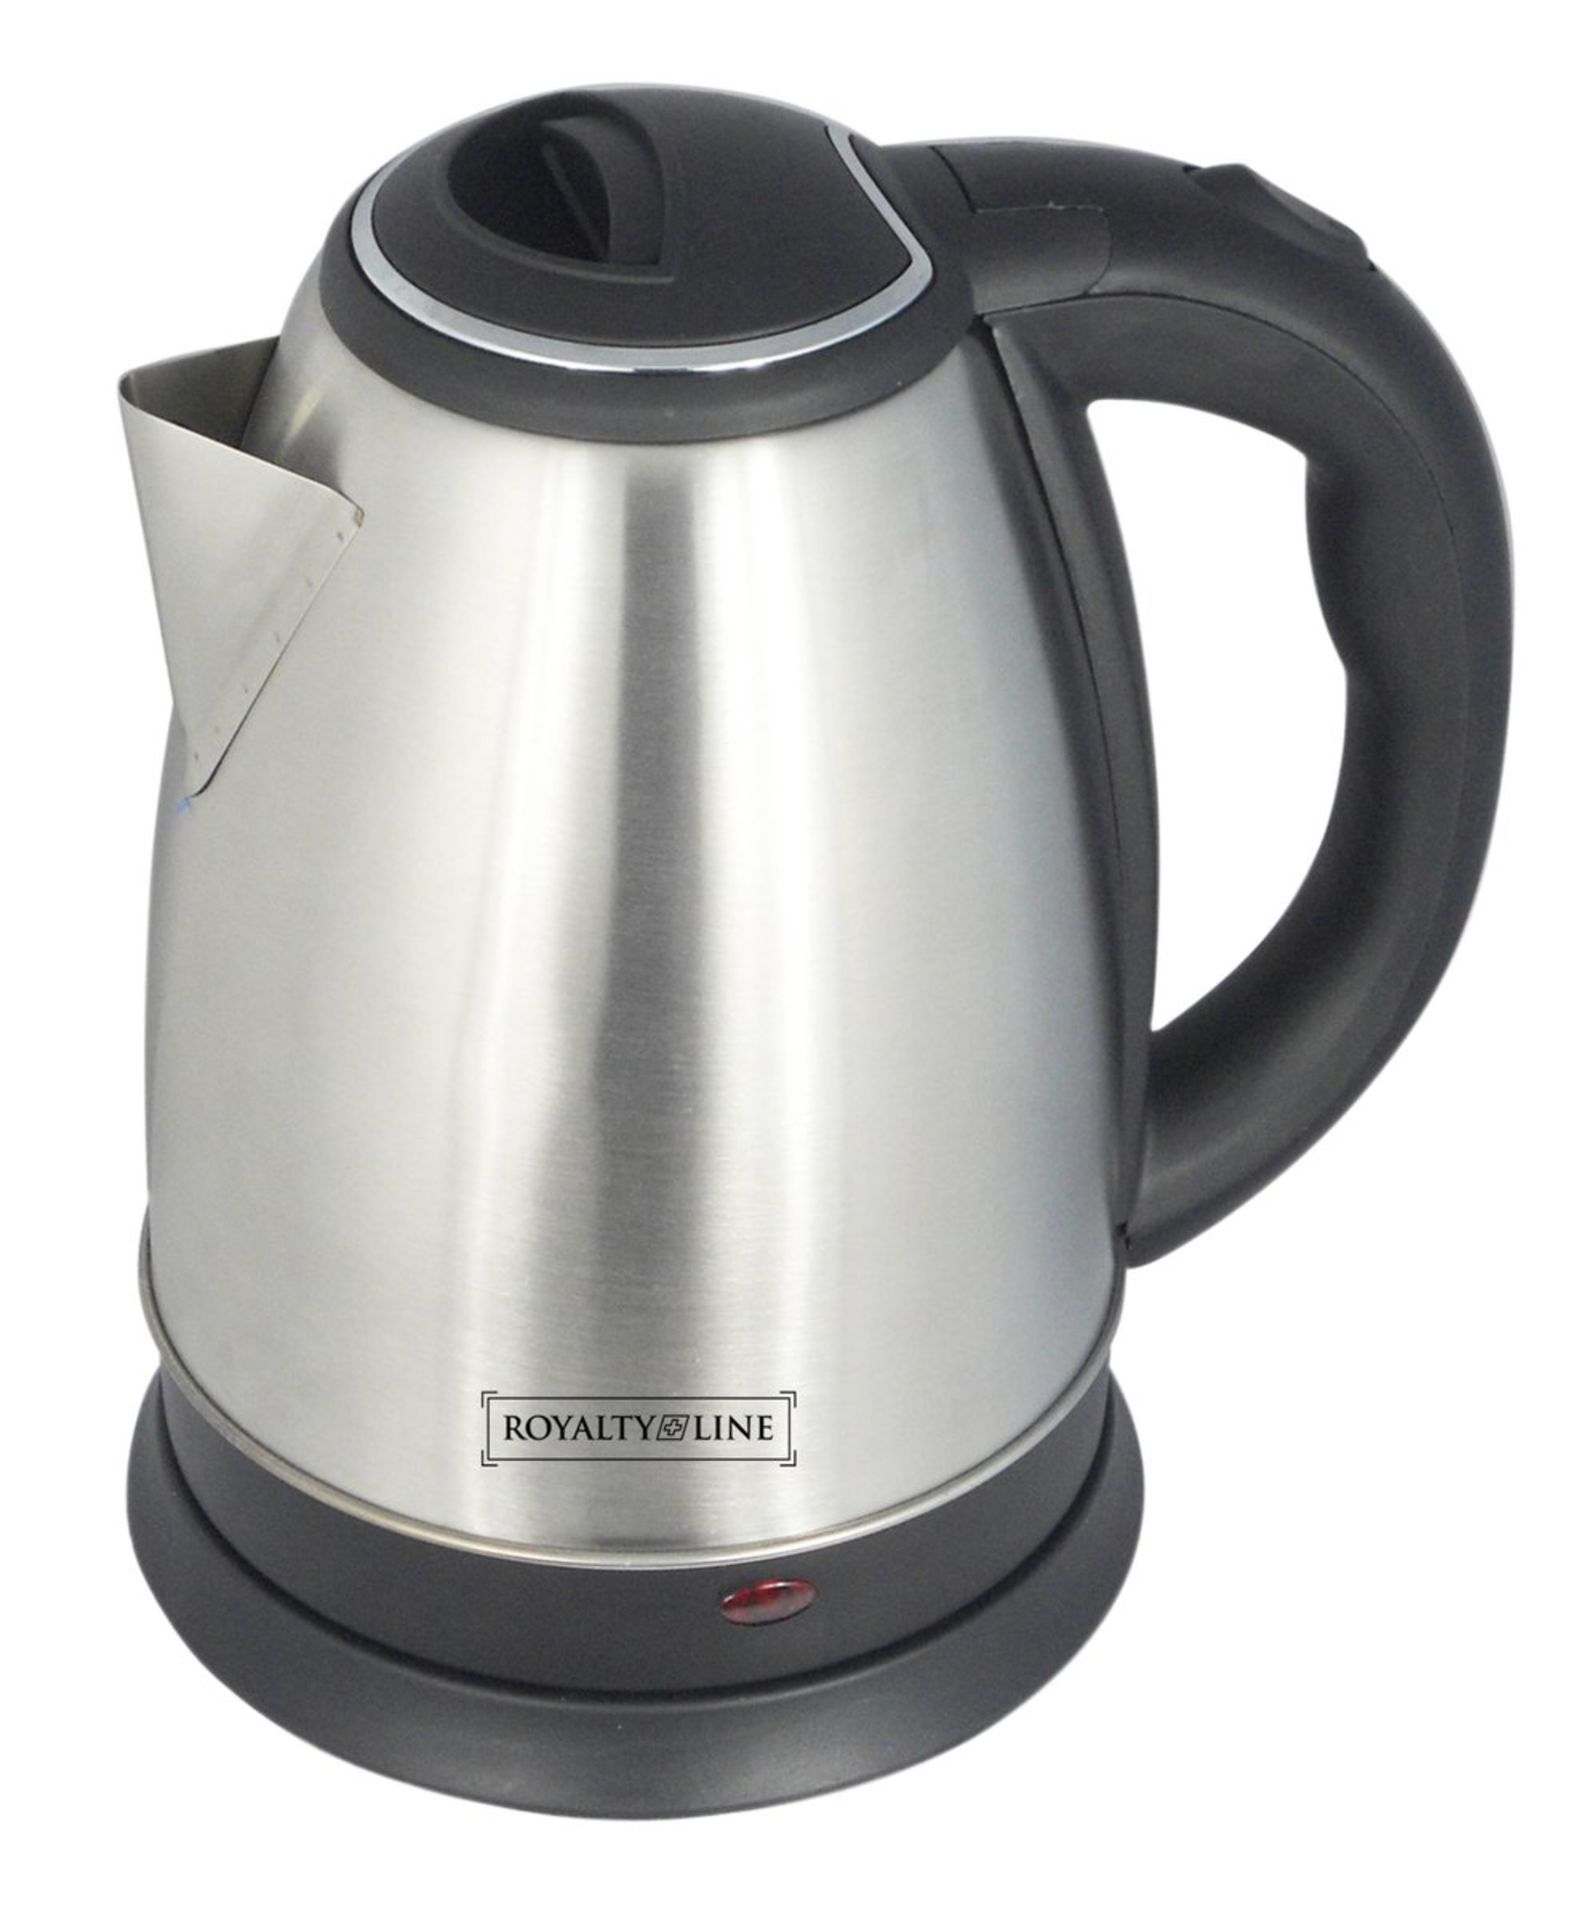 V Brand New Royalty 1.8L Stainless Steel Cordless Kettle - Silver (Euro Plug) RRP 55.90 Euros